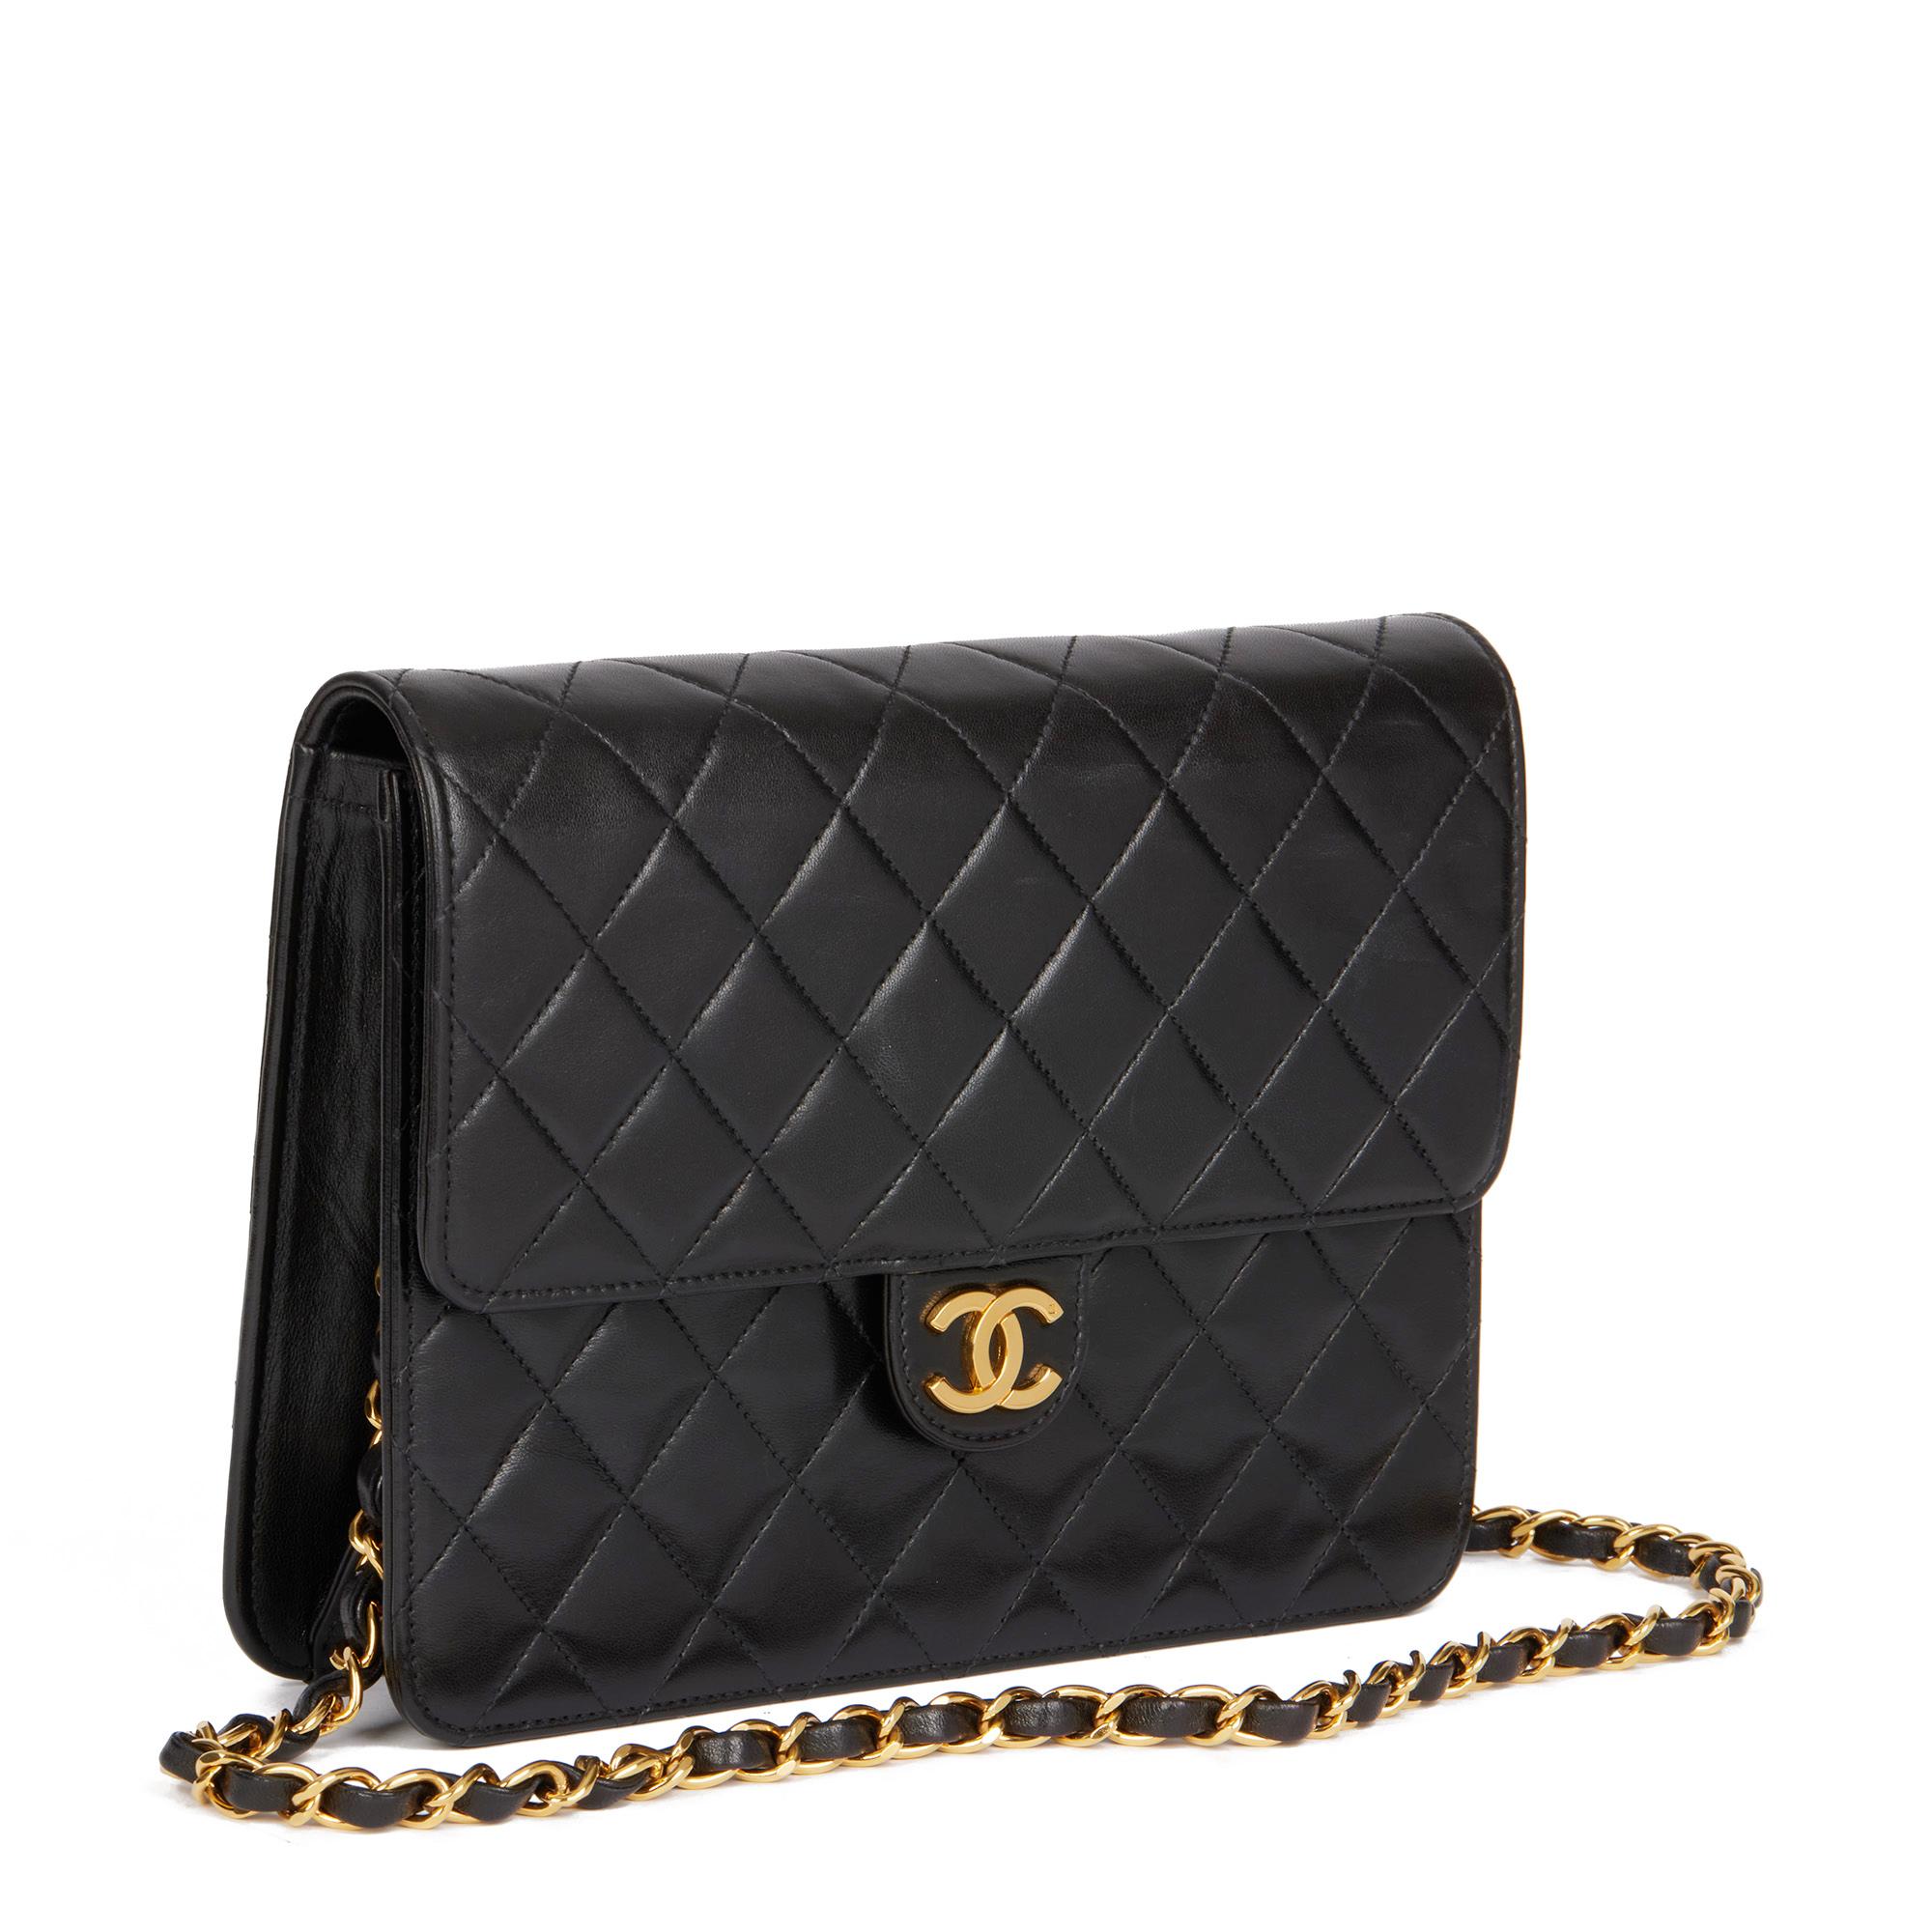 CHANEL
Black Quilted Lambskin Vintage Small Classic Single Flap Bag

Xupes Reference: HB4650
Serial Number: 3411394
Age (Circa): 1994
Accompanied By: Authenticity Card
Authenticity Details: Authenticity Card, Serial Sticker (Made in France) 
Gender: